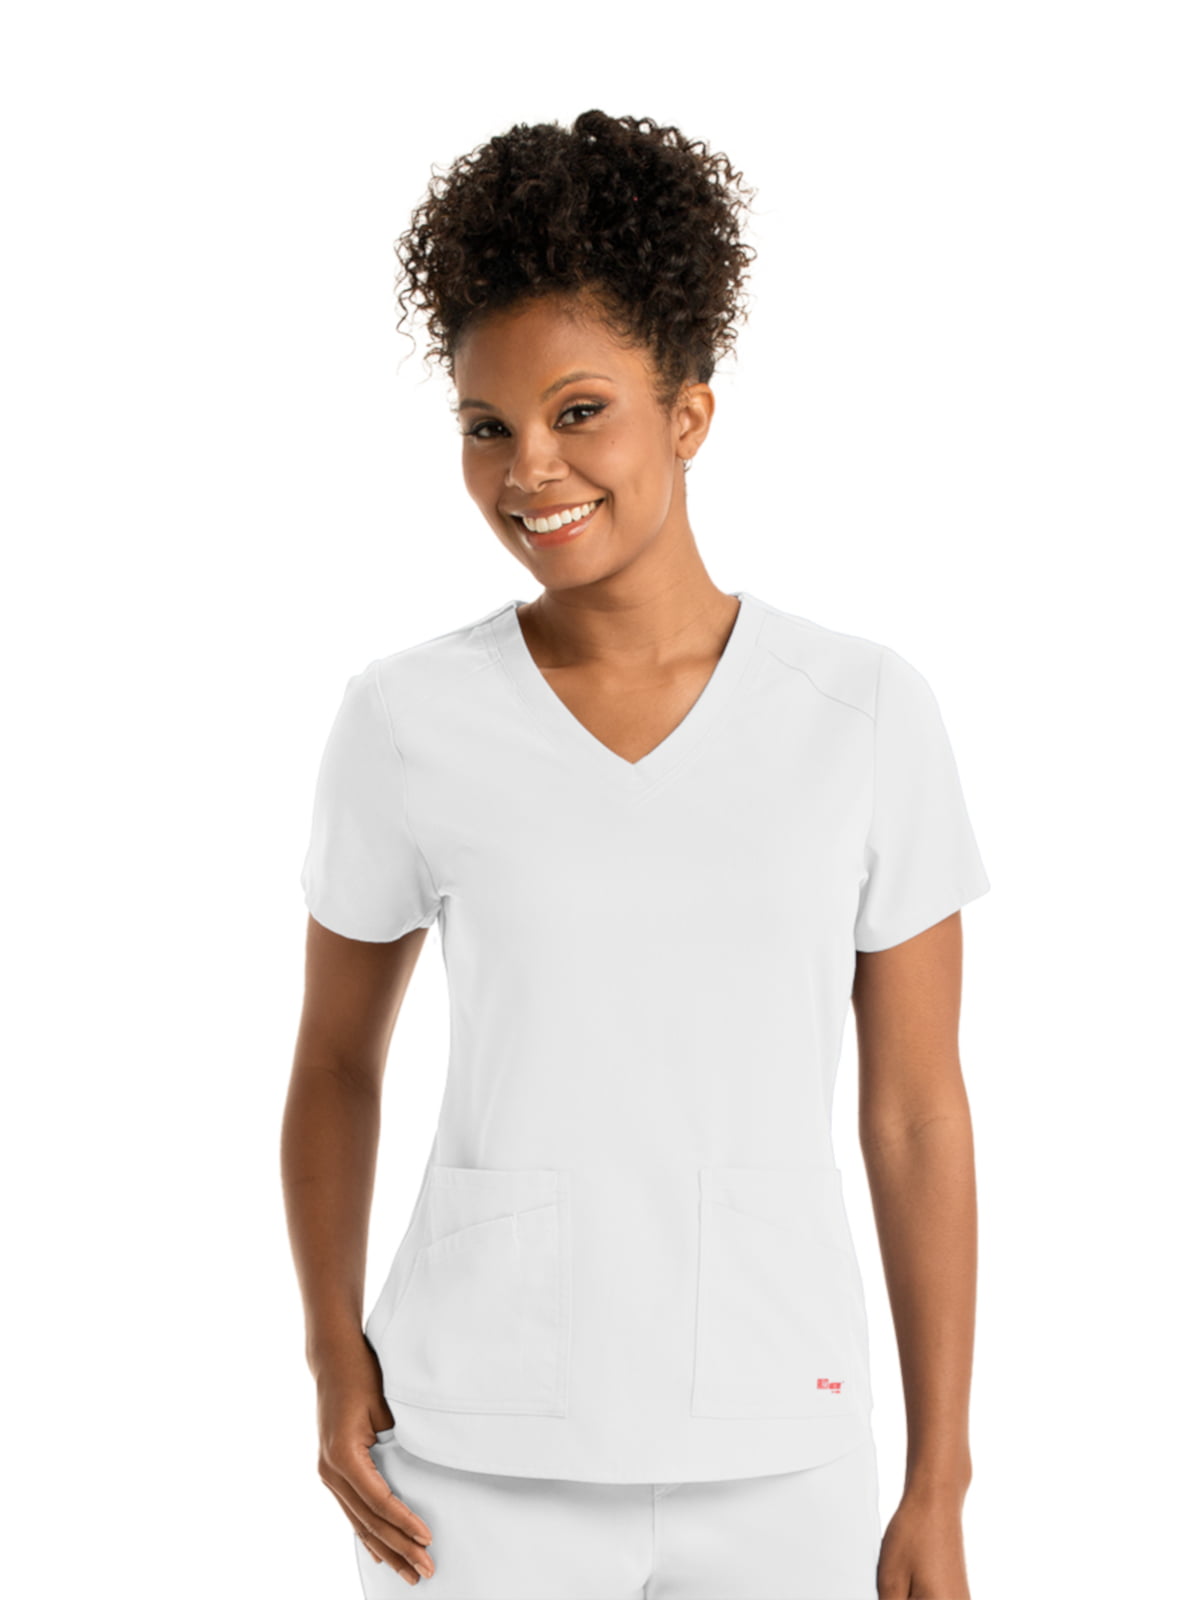 LITE JERSEY - NATURAL – LADY WHITE CO.